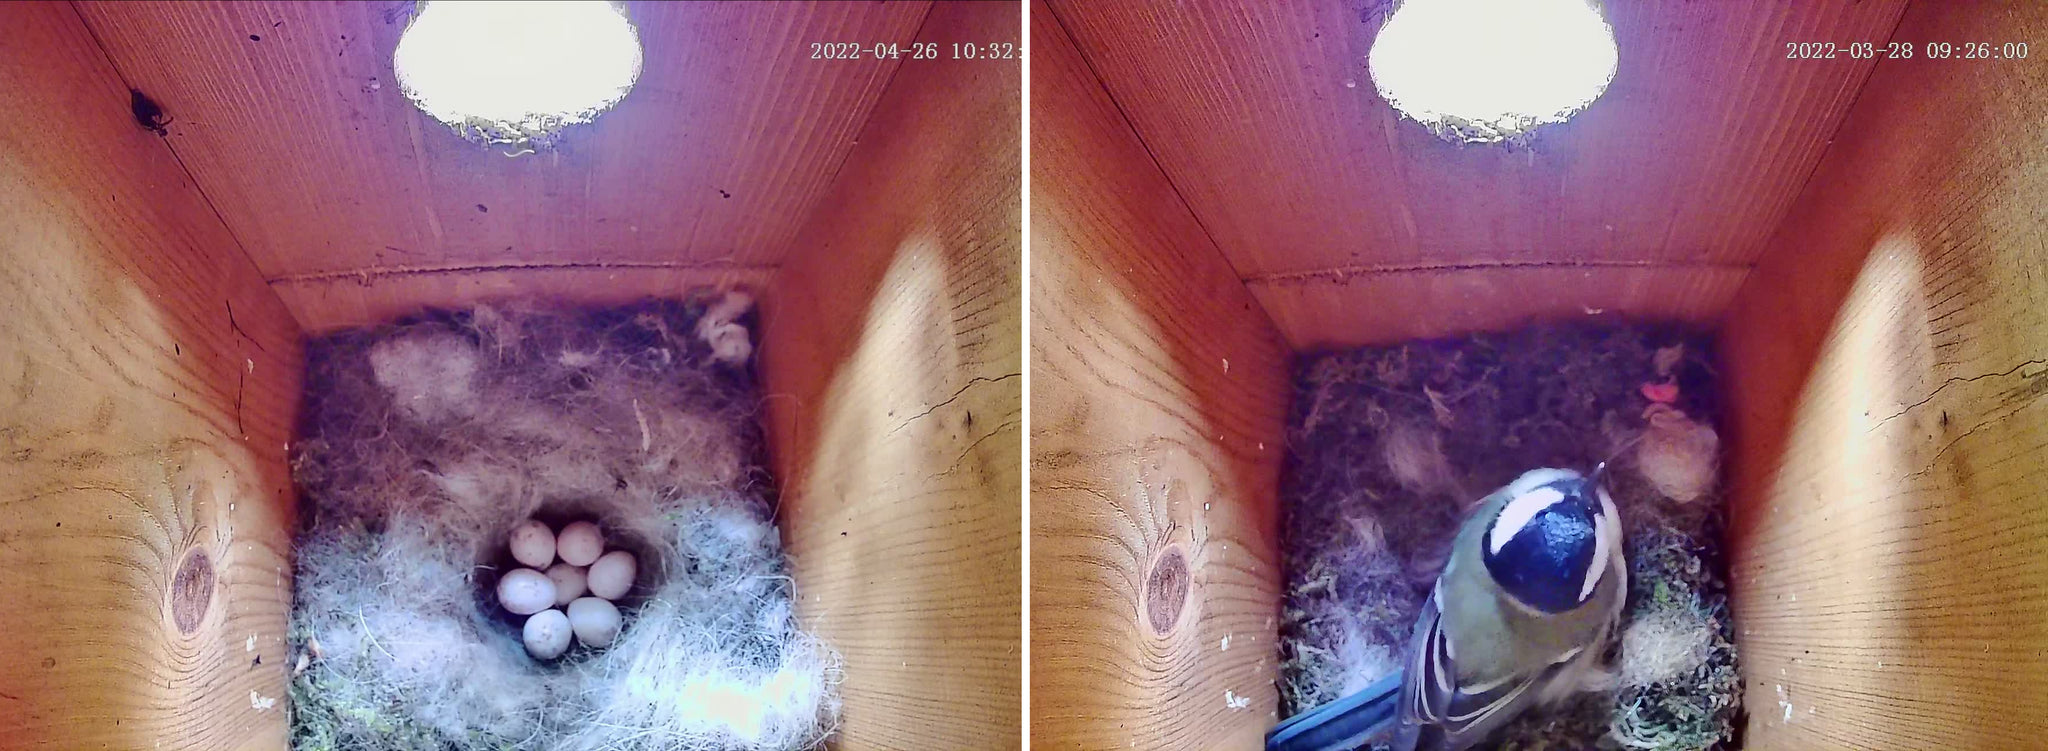 Inside the workshop bird box a great tit has laid seven eggs in a soft nest of fur and moss